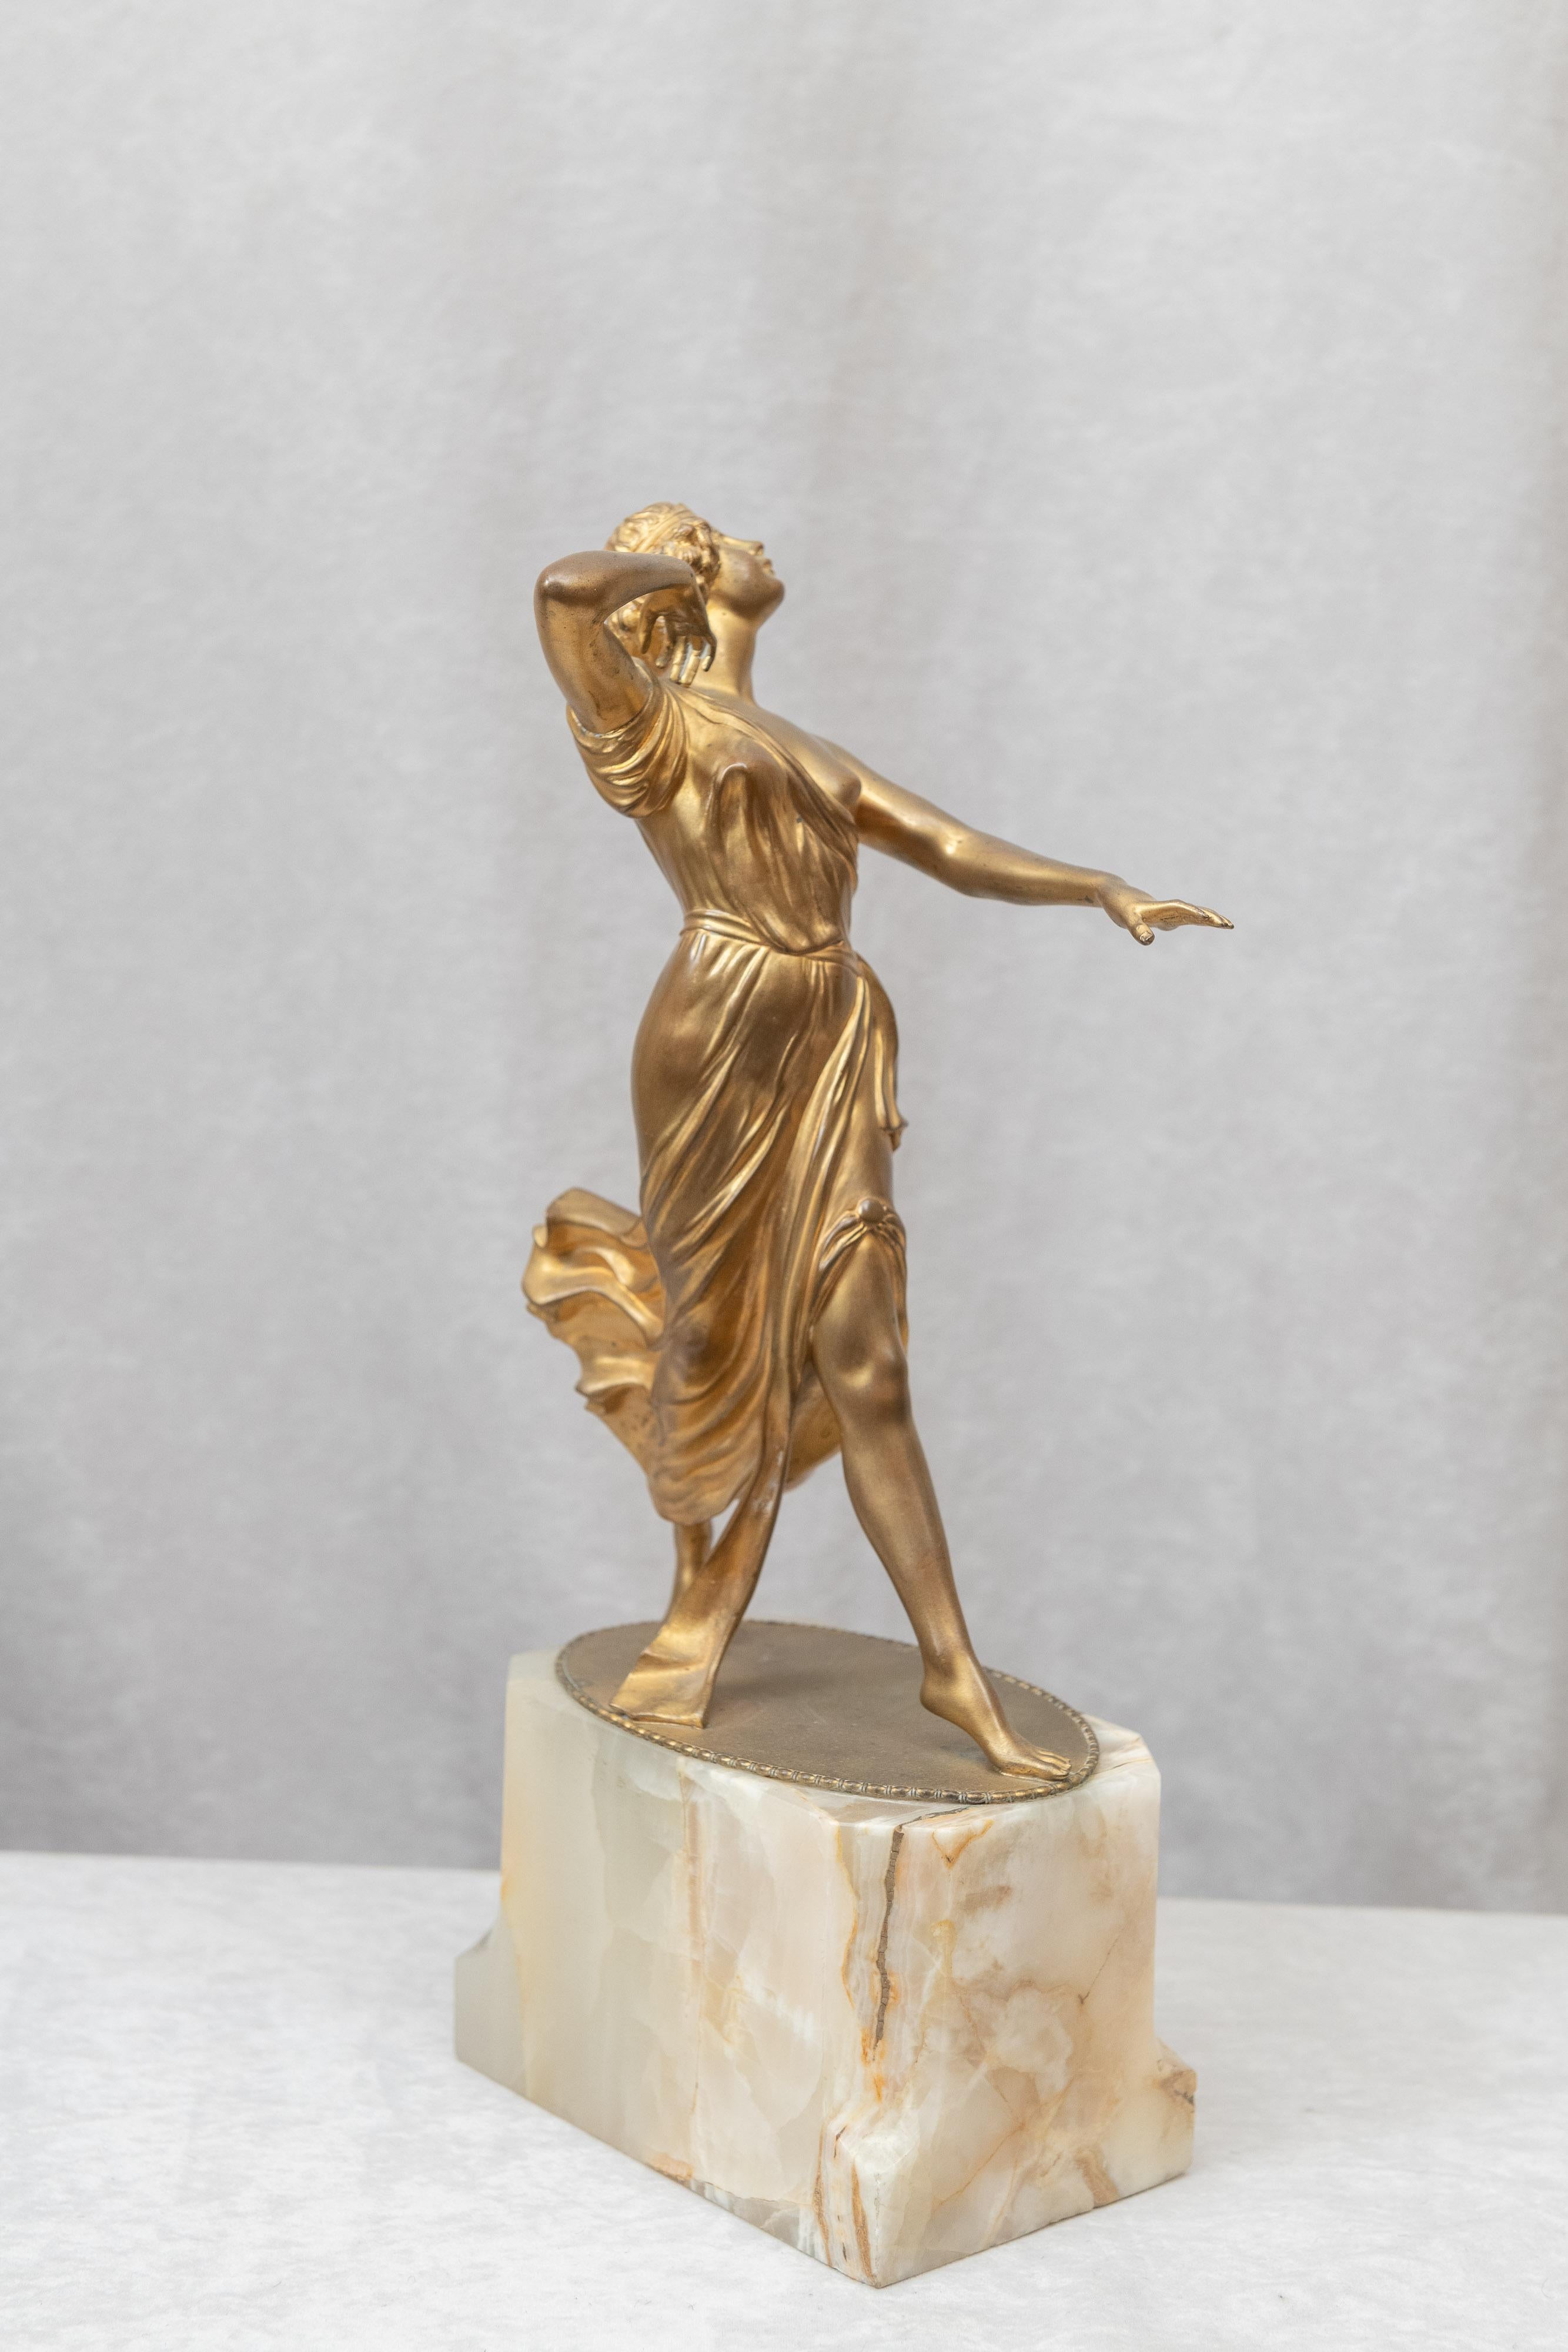 If you like Art Deco, this bronze should appeal to you. This graceful dancer retains her original gilt finish and is mounted on a beautiful onyx base. Artist-signed A. Ermler. A listed German artist of the Art Deco period. One really unusual and